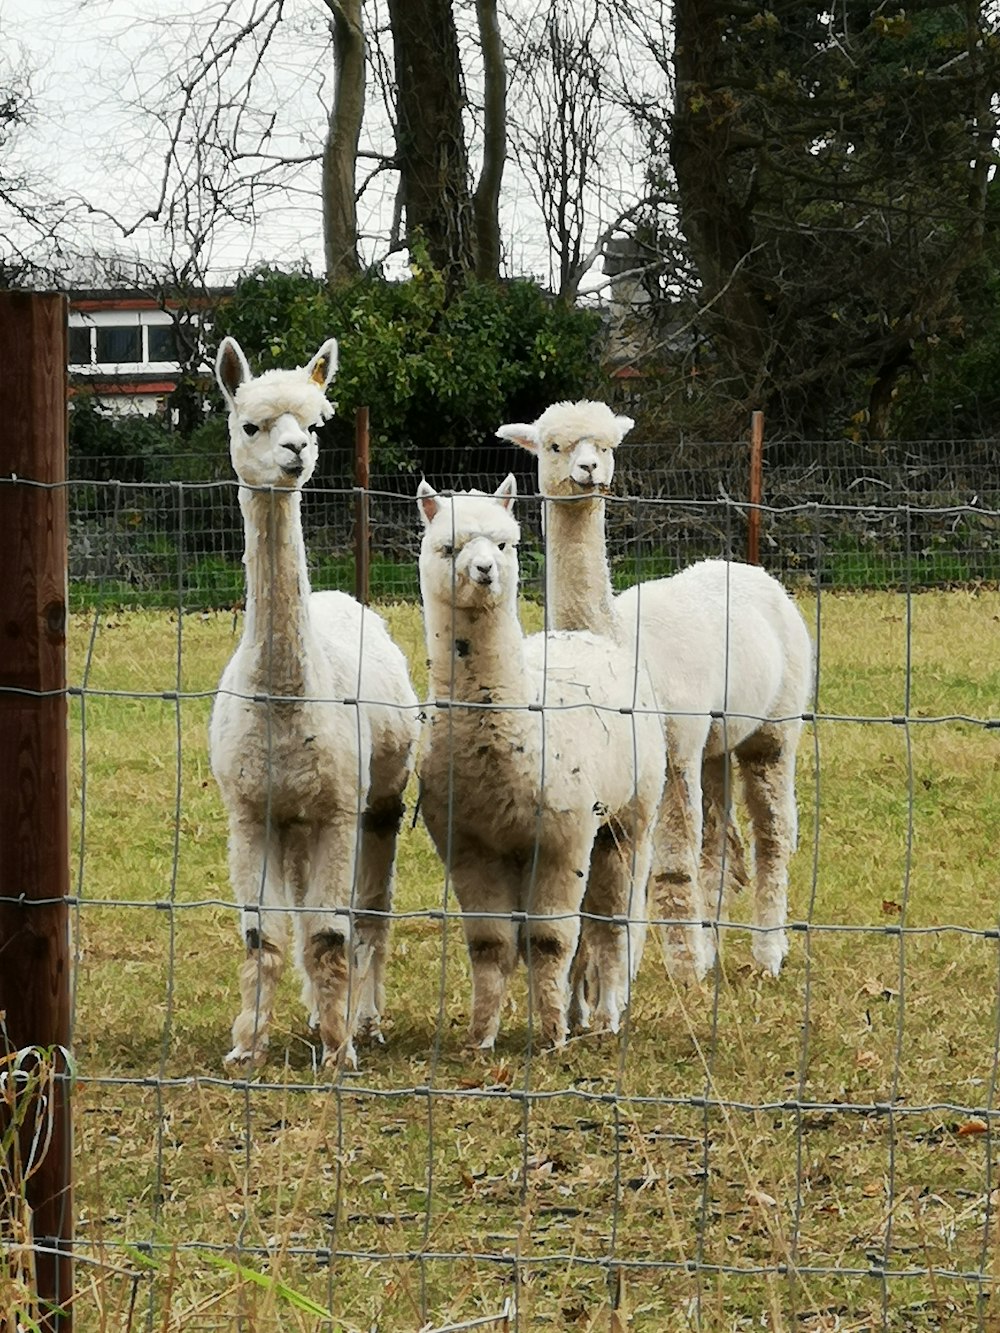 a group of alpacas in a fenced in area